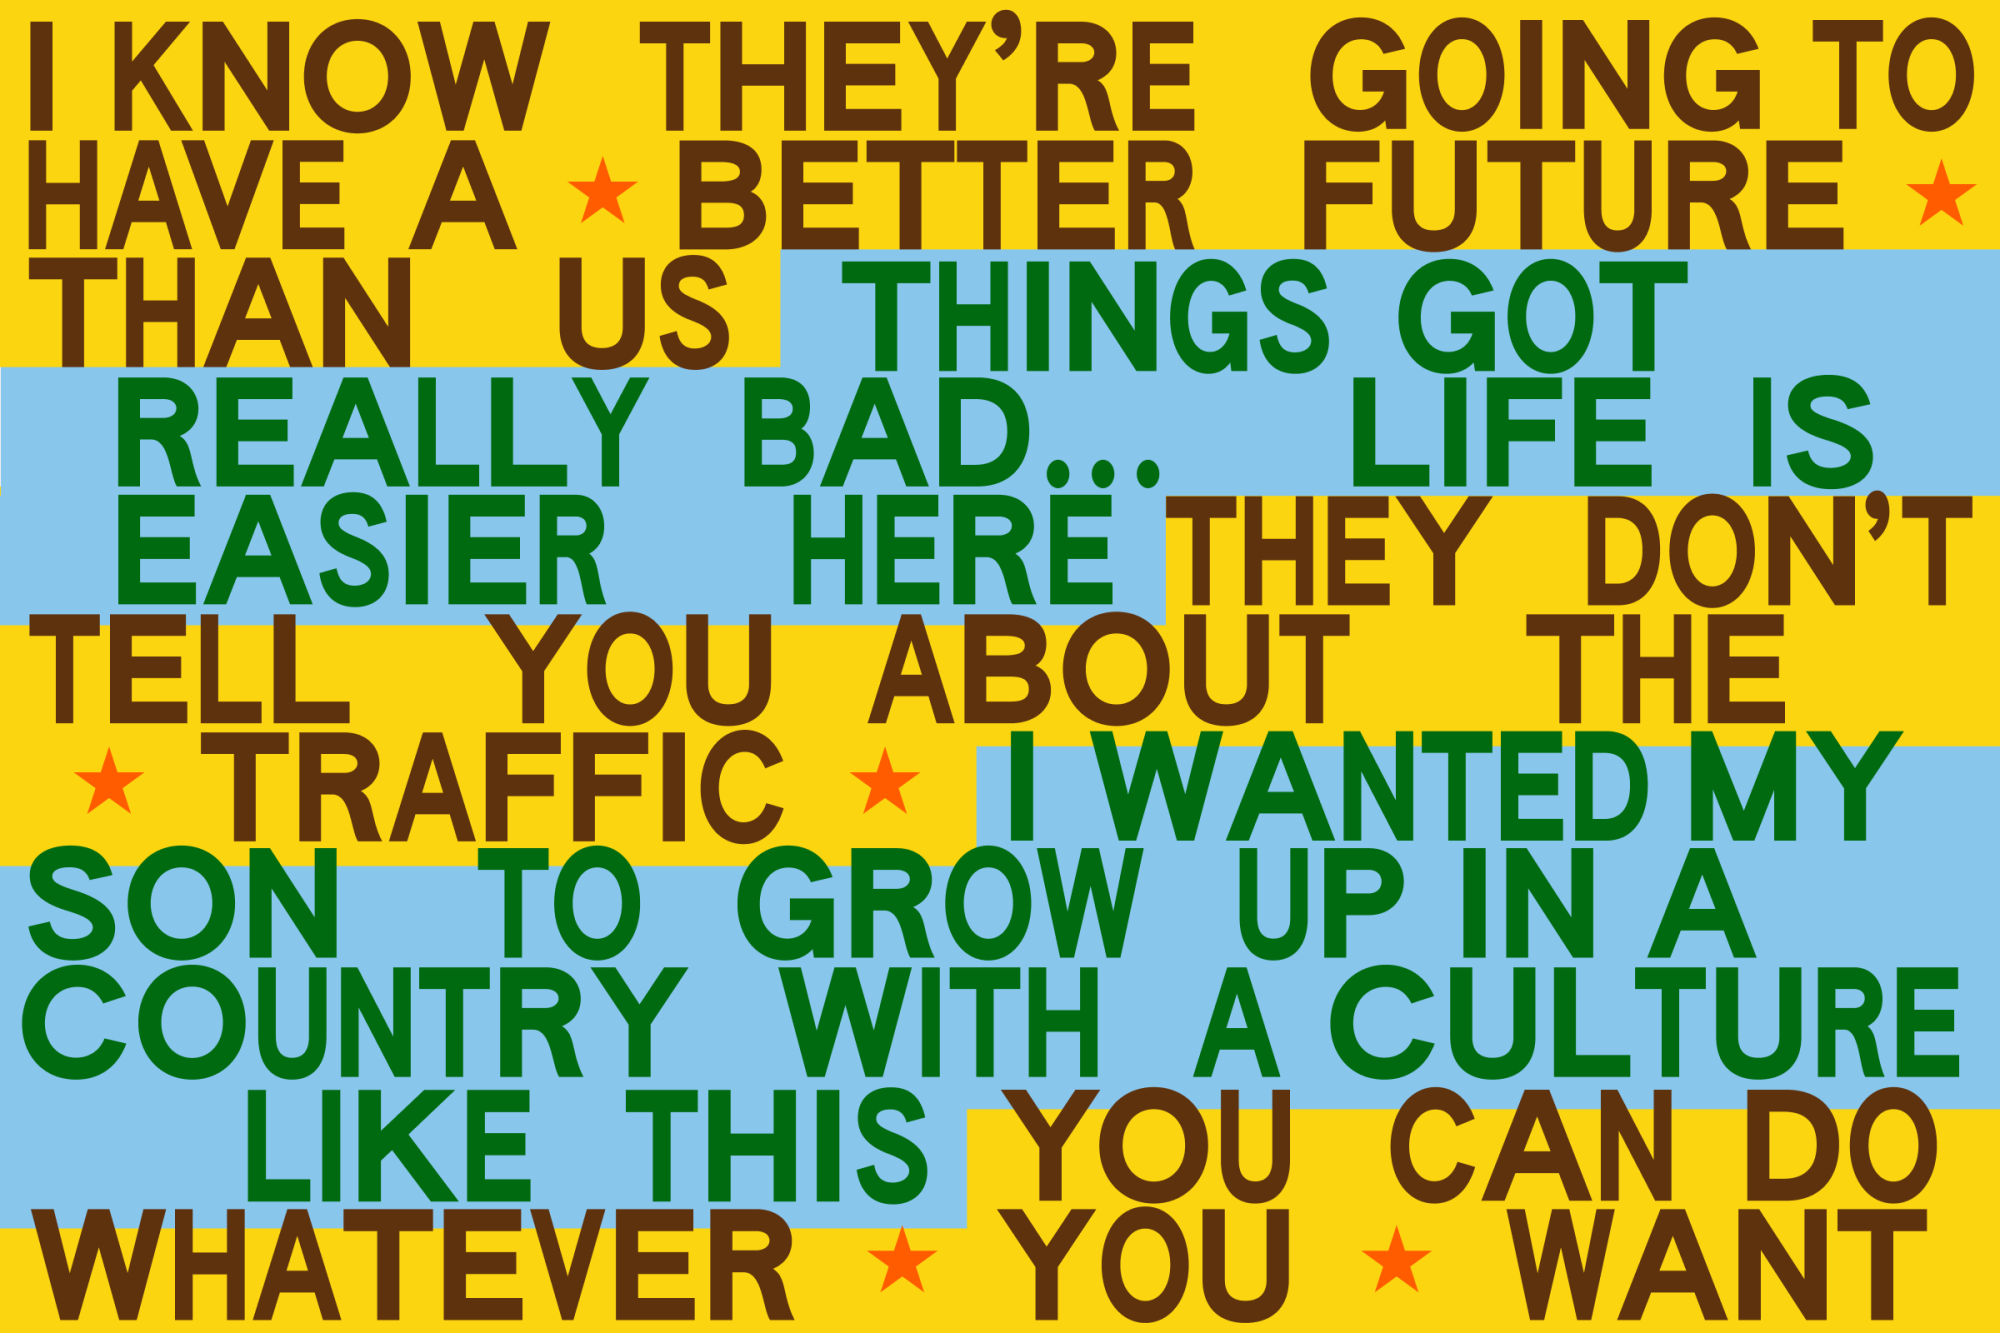 Quotes compiled from survey participants in a blocky flag